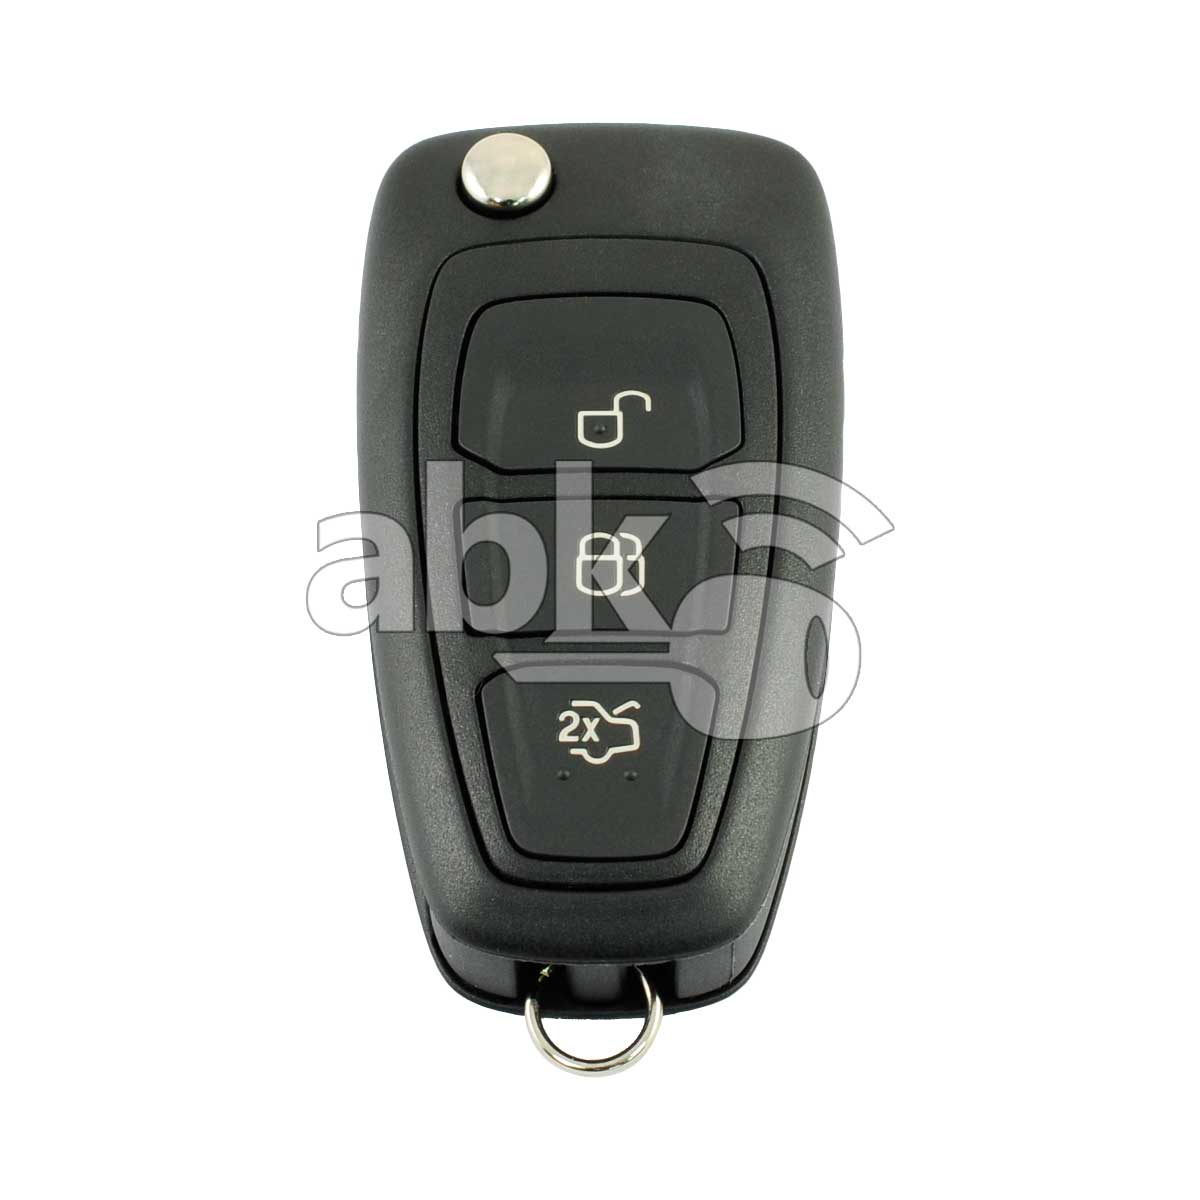 Ford Focus Mondeo C-Max 2010+ Flip Remote 3Buttons 5WK49986 434MHz HU101 2180803 1743826 - ABK-4121 